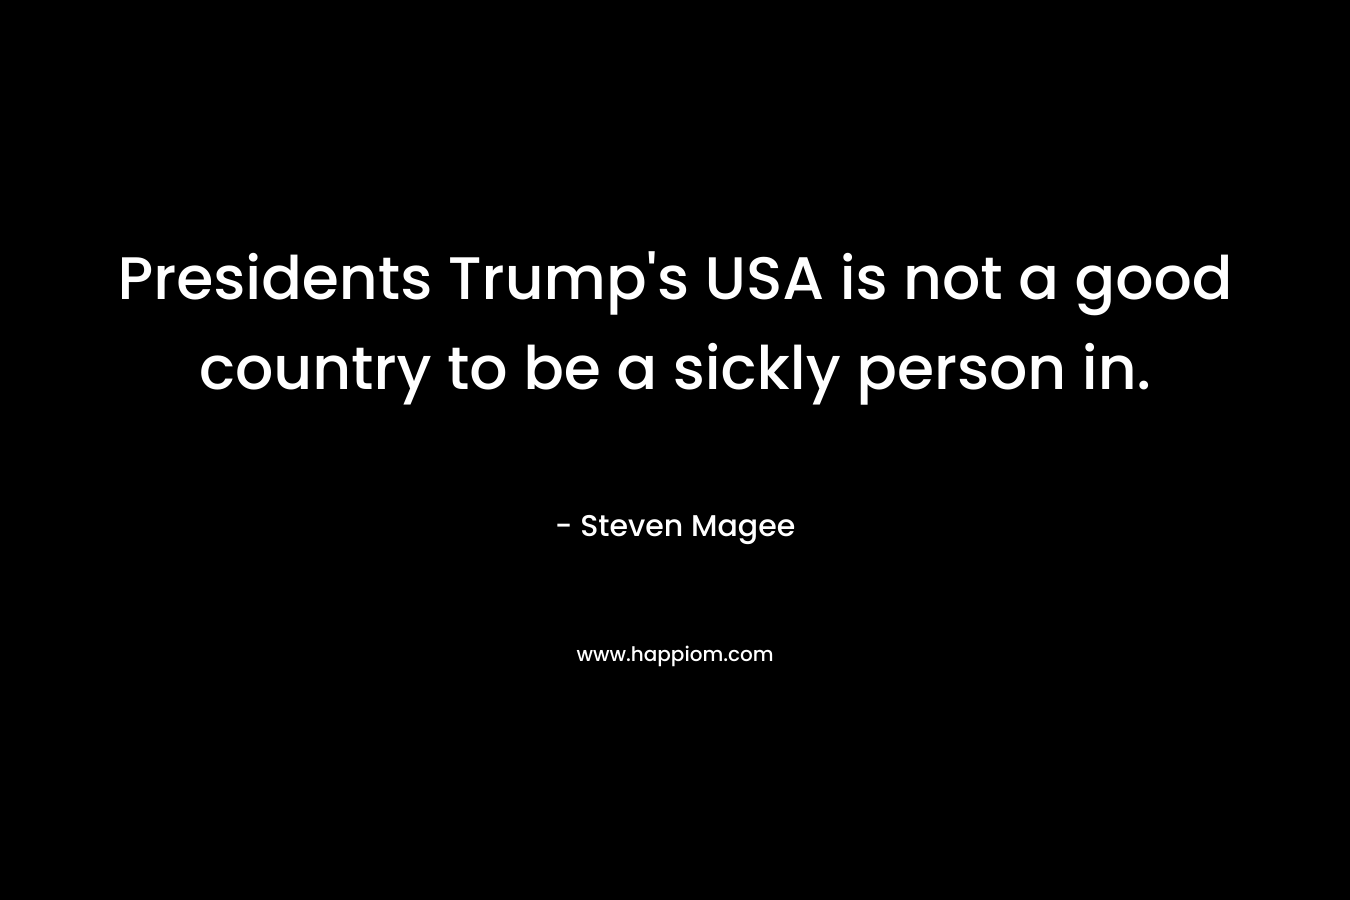 Presidents Trump’s USA is not a good country to be a sickly person in. – Steven Magee